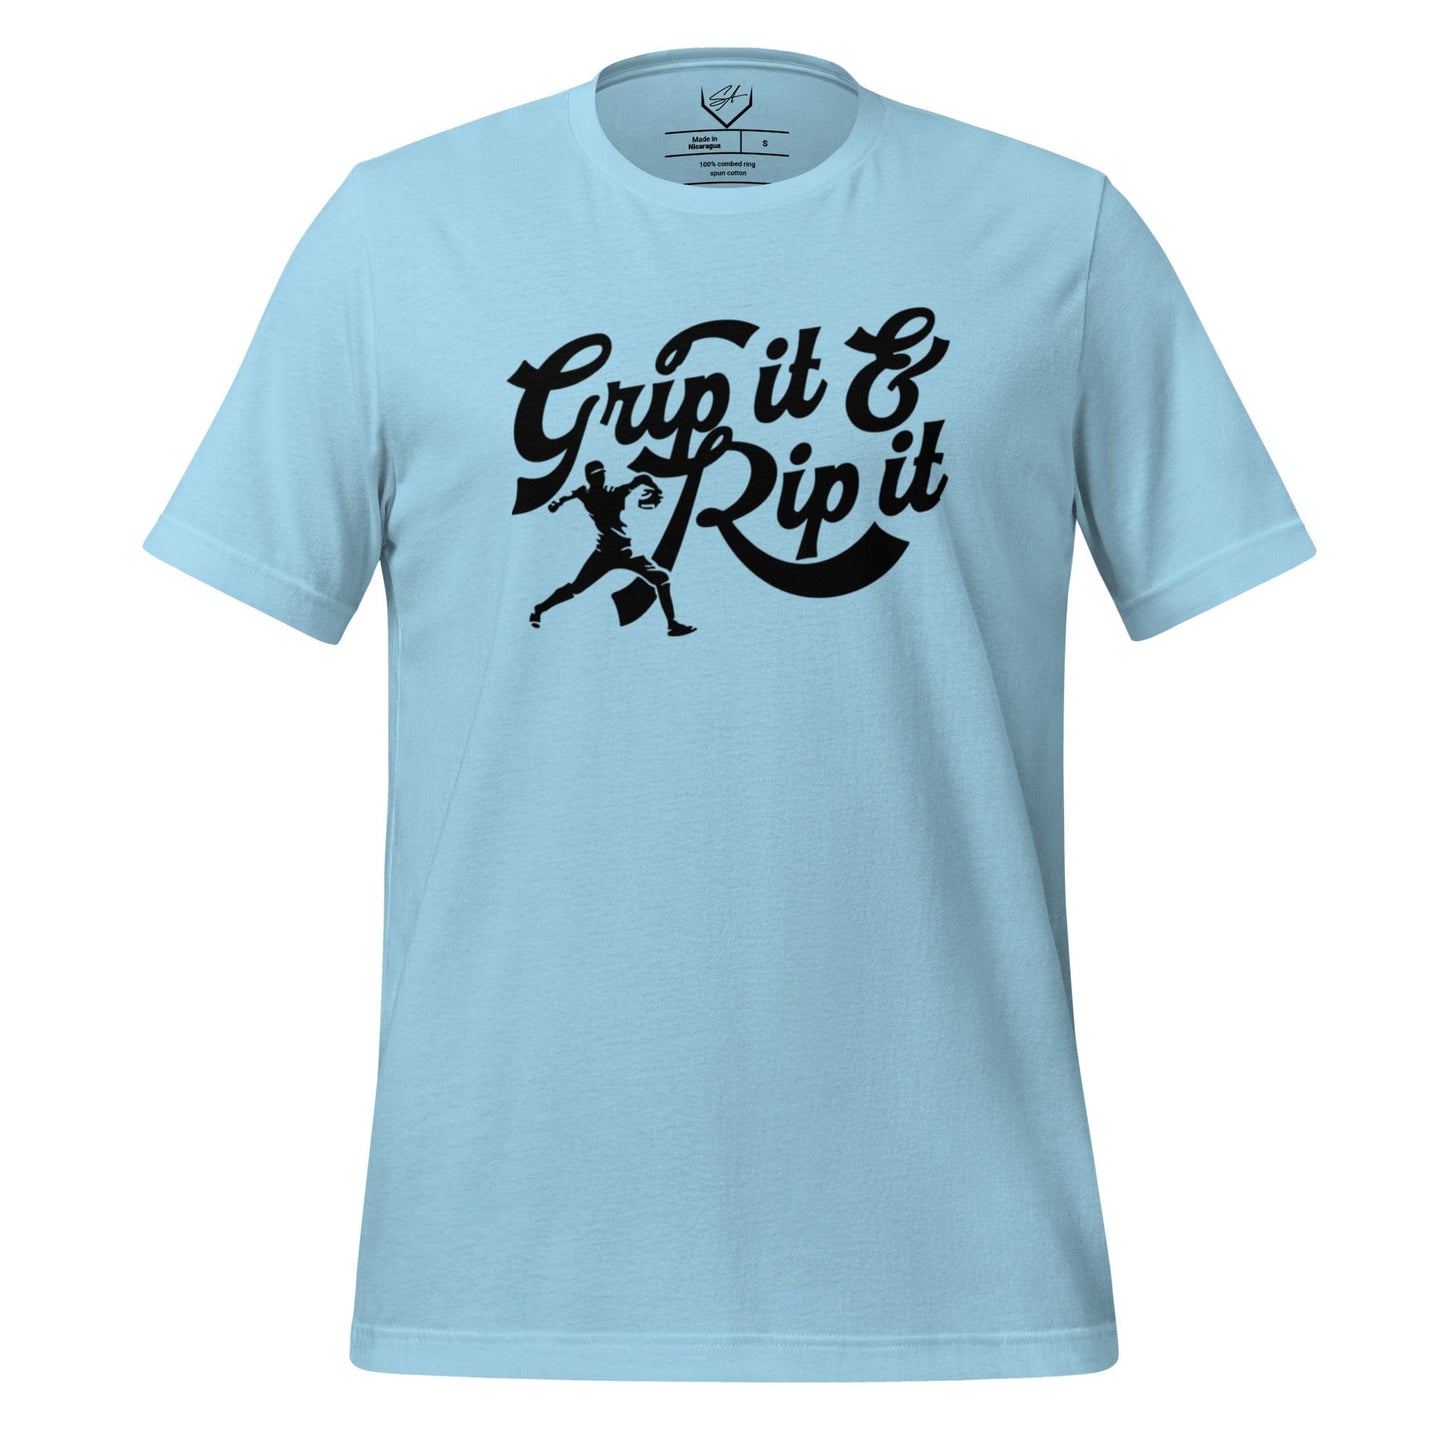 Grip It And Rip It - Adult Tee